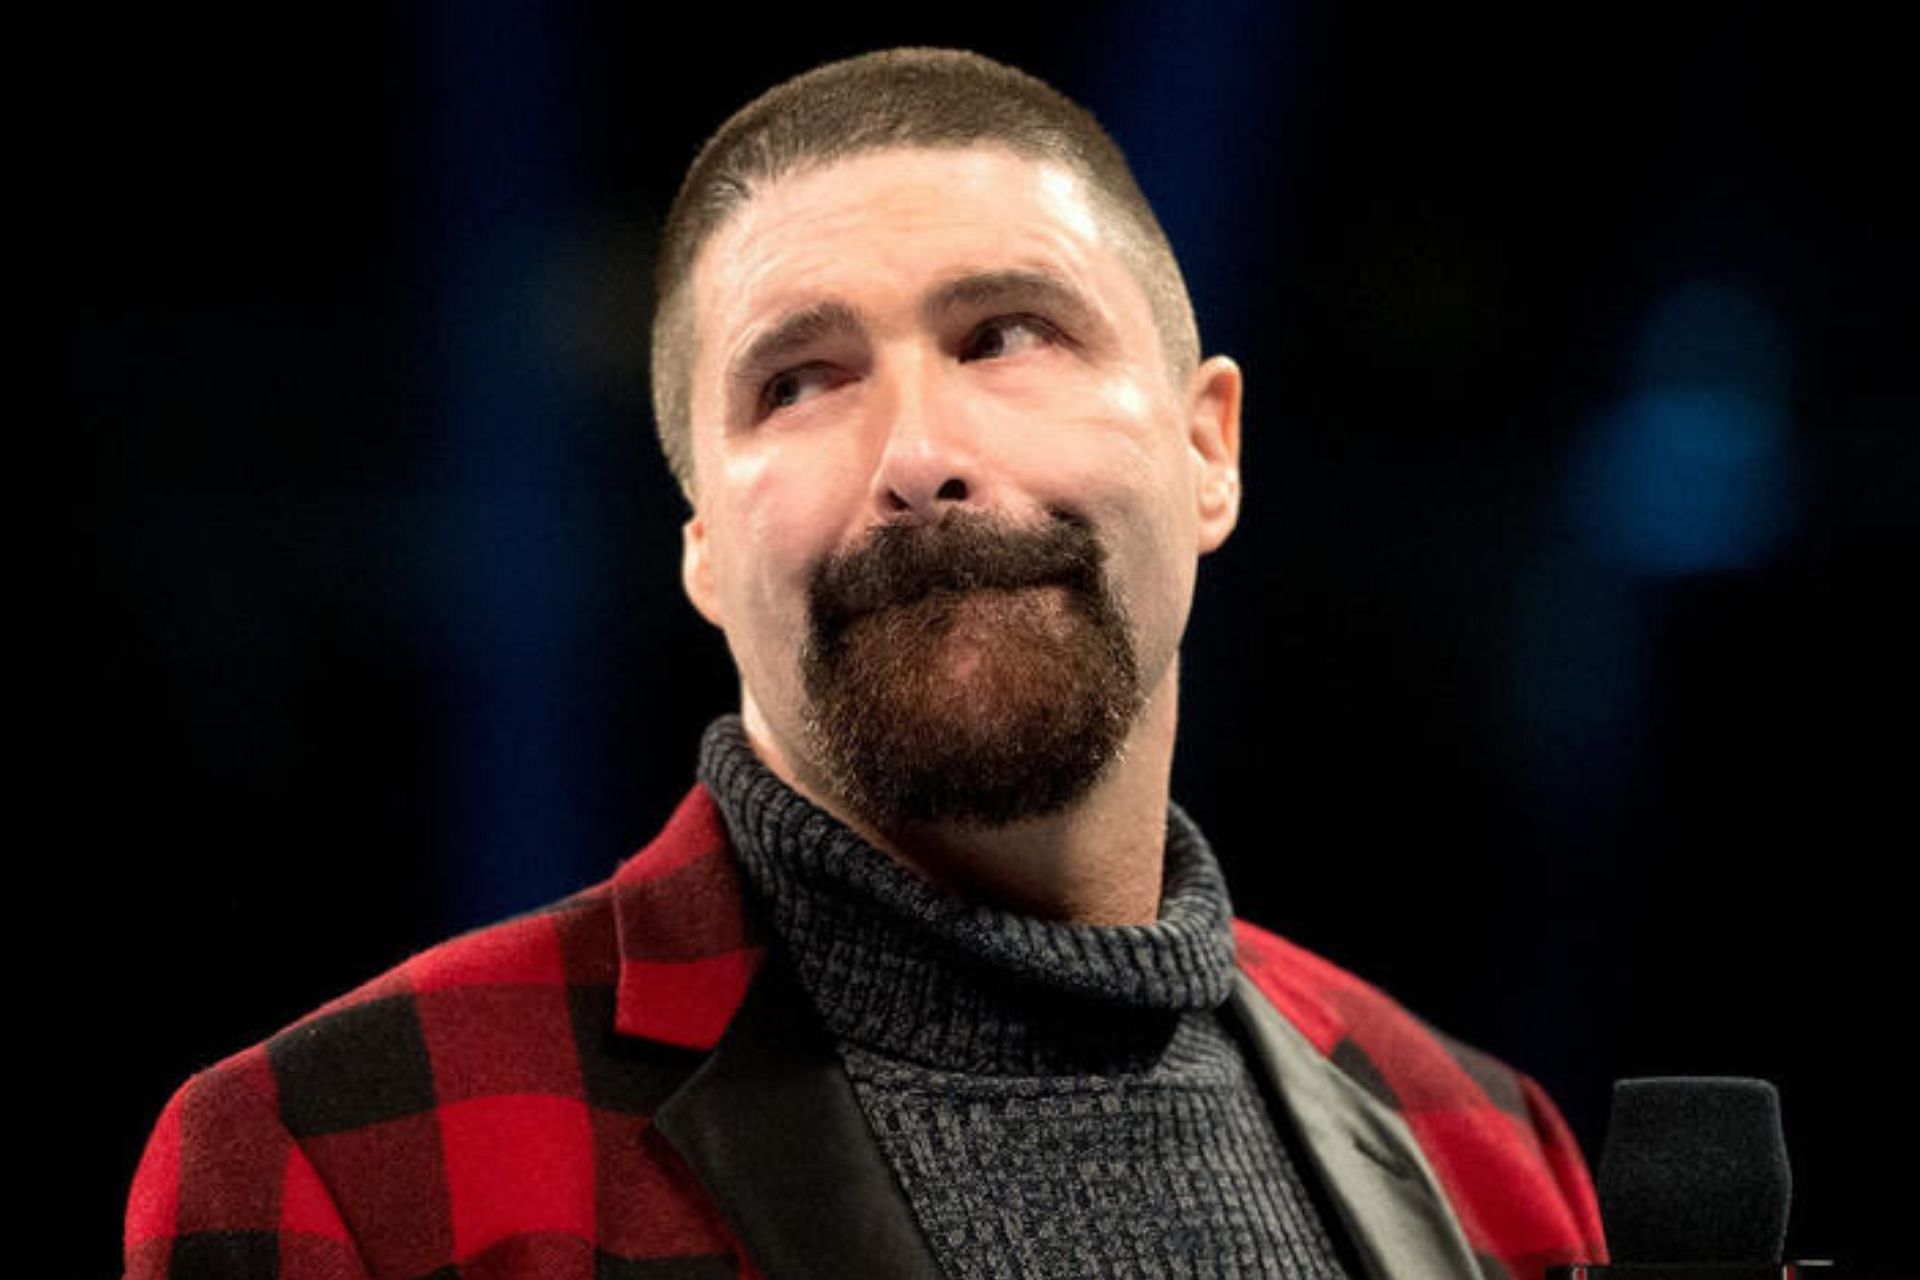 Mick Foley was a cause of concern for the current AEW wrestler